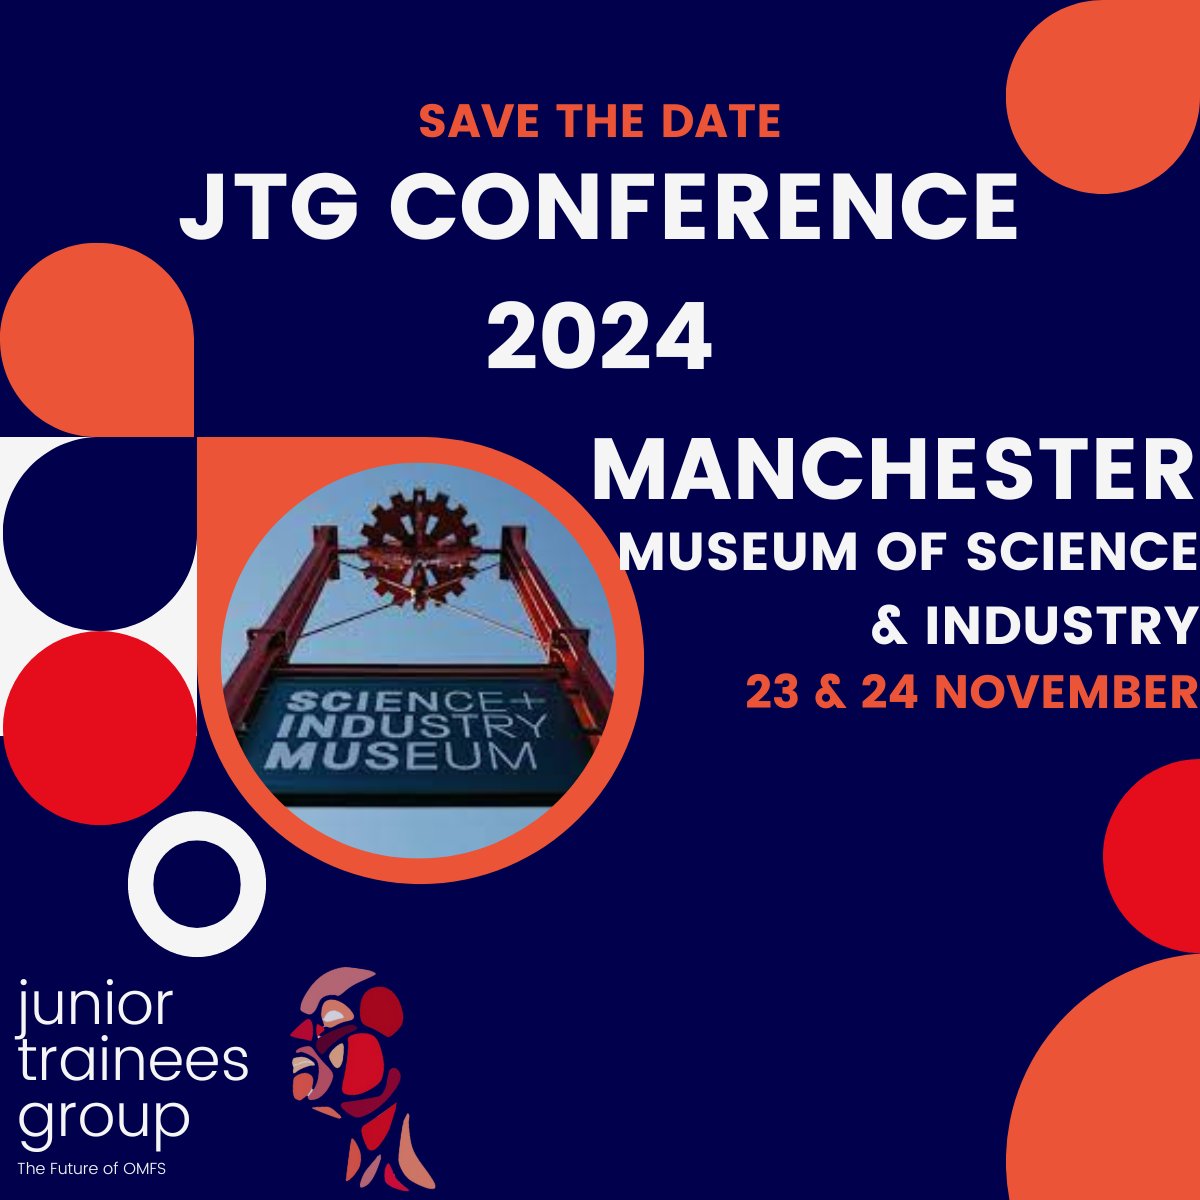 SAVE THE DATE! JTG conference is going to be in Manchester this year on 23&24 November! more info to follow soon #jtgofbaoms #fortraineesbytrainees